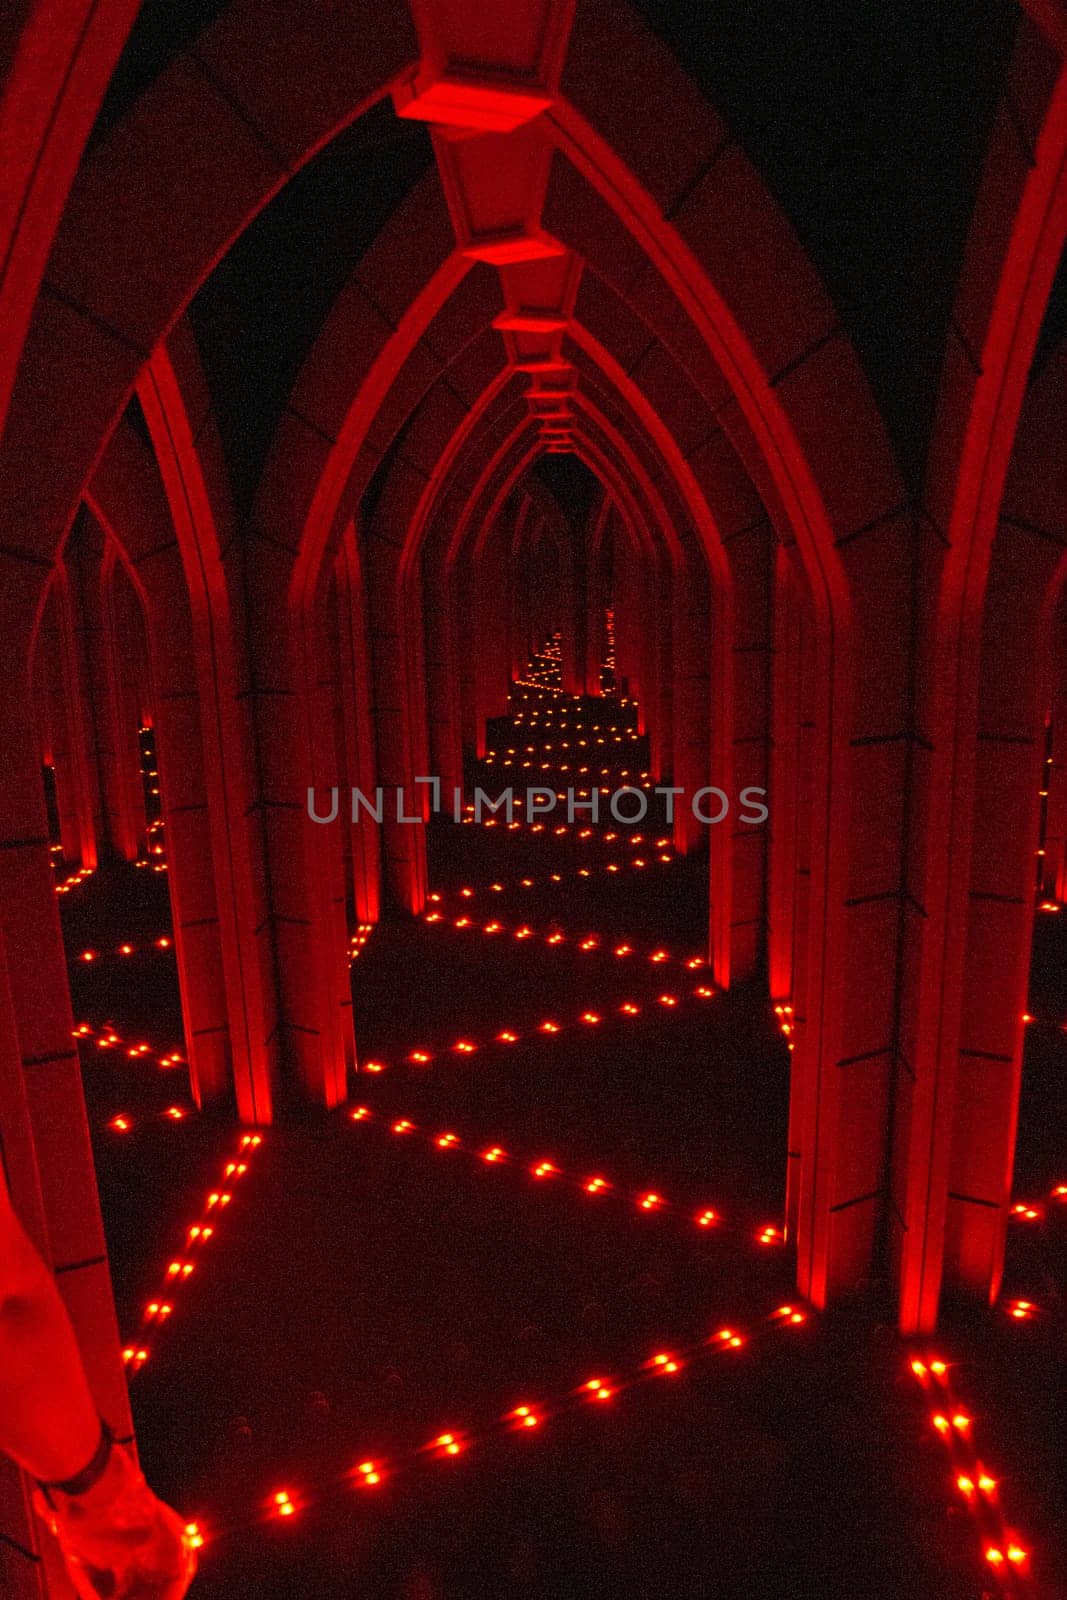 Enigmatic Mirror Maze bathed in a monochromatic red hue create a suspenseful atmosphere in an architectural structure resembling a cathedral aisle. Perfect for horror, thrillers, historical themes, or marketing materials.